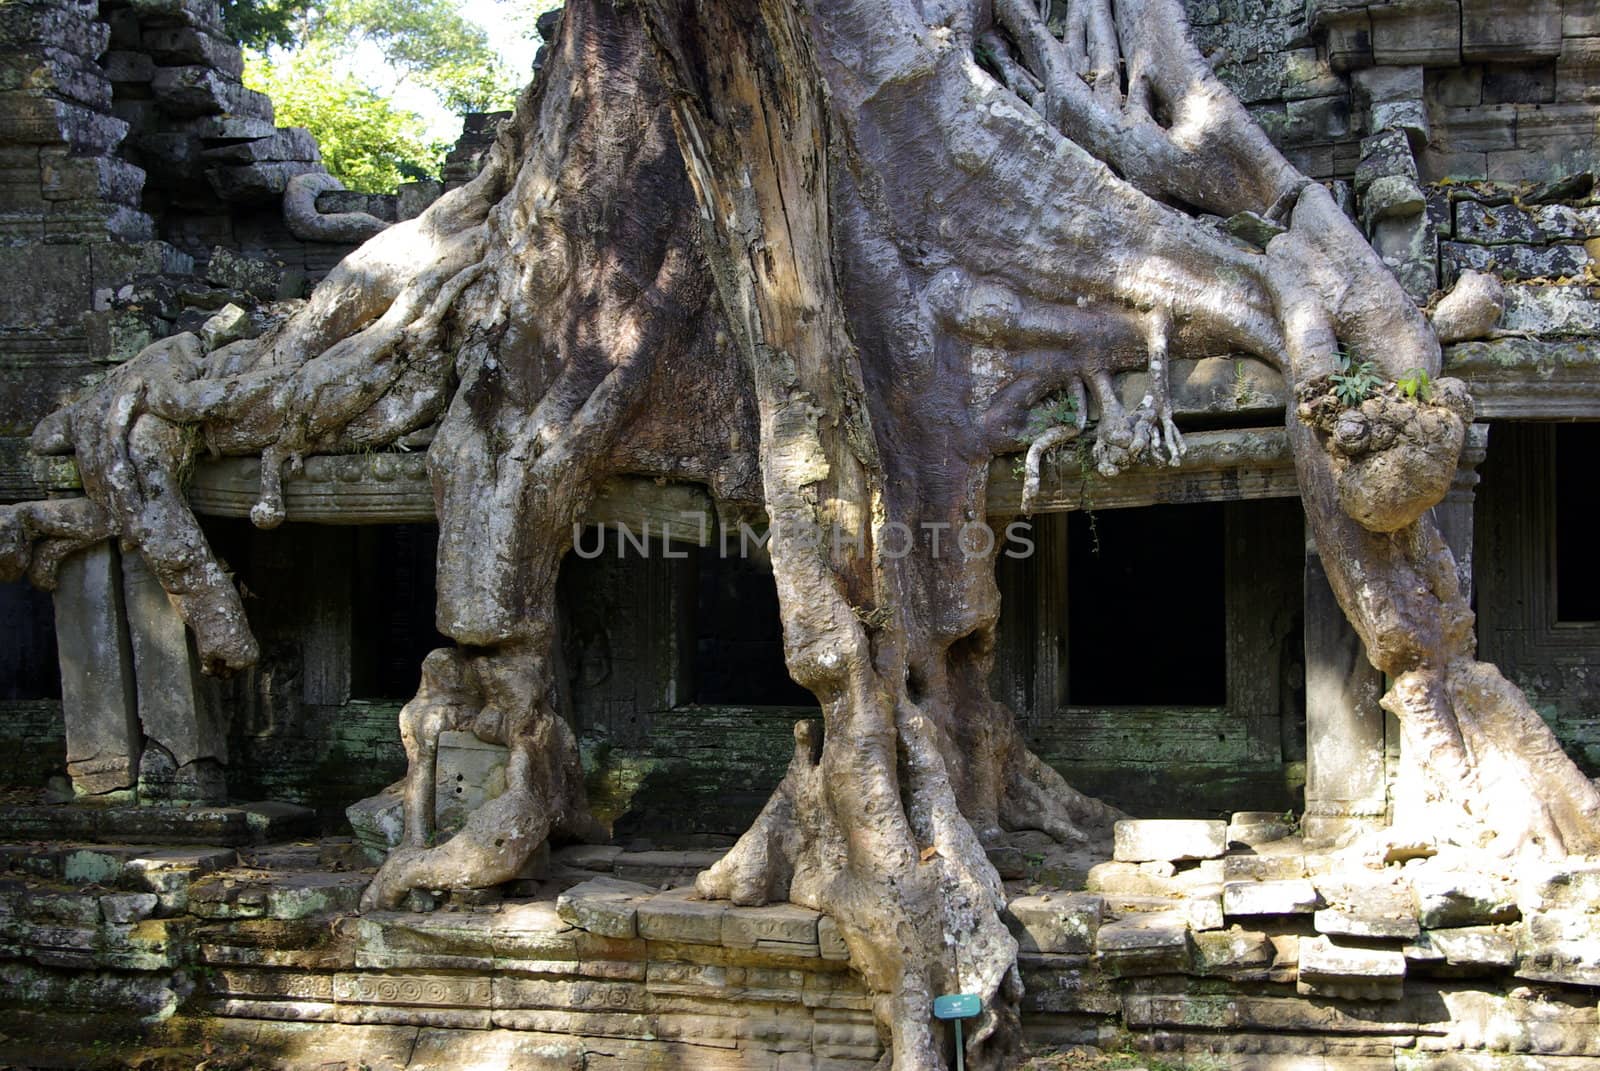 The roots of this tree are really incredible, they have completely covered the wall and part of the pillars of this temple.